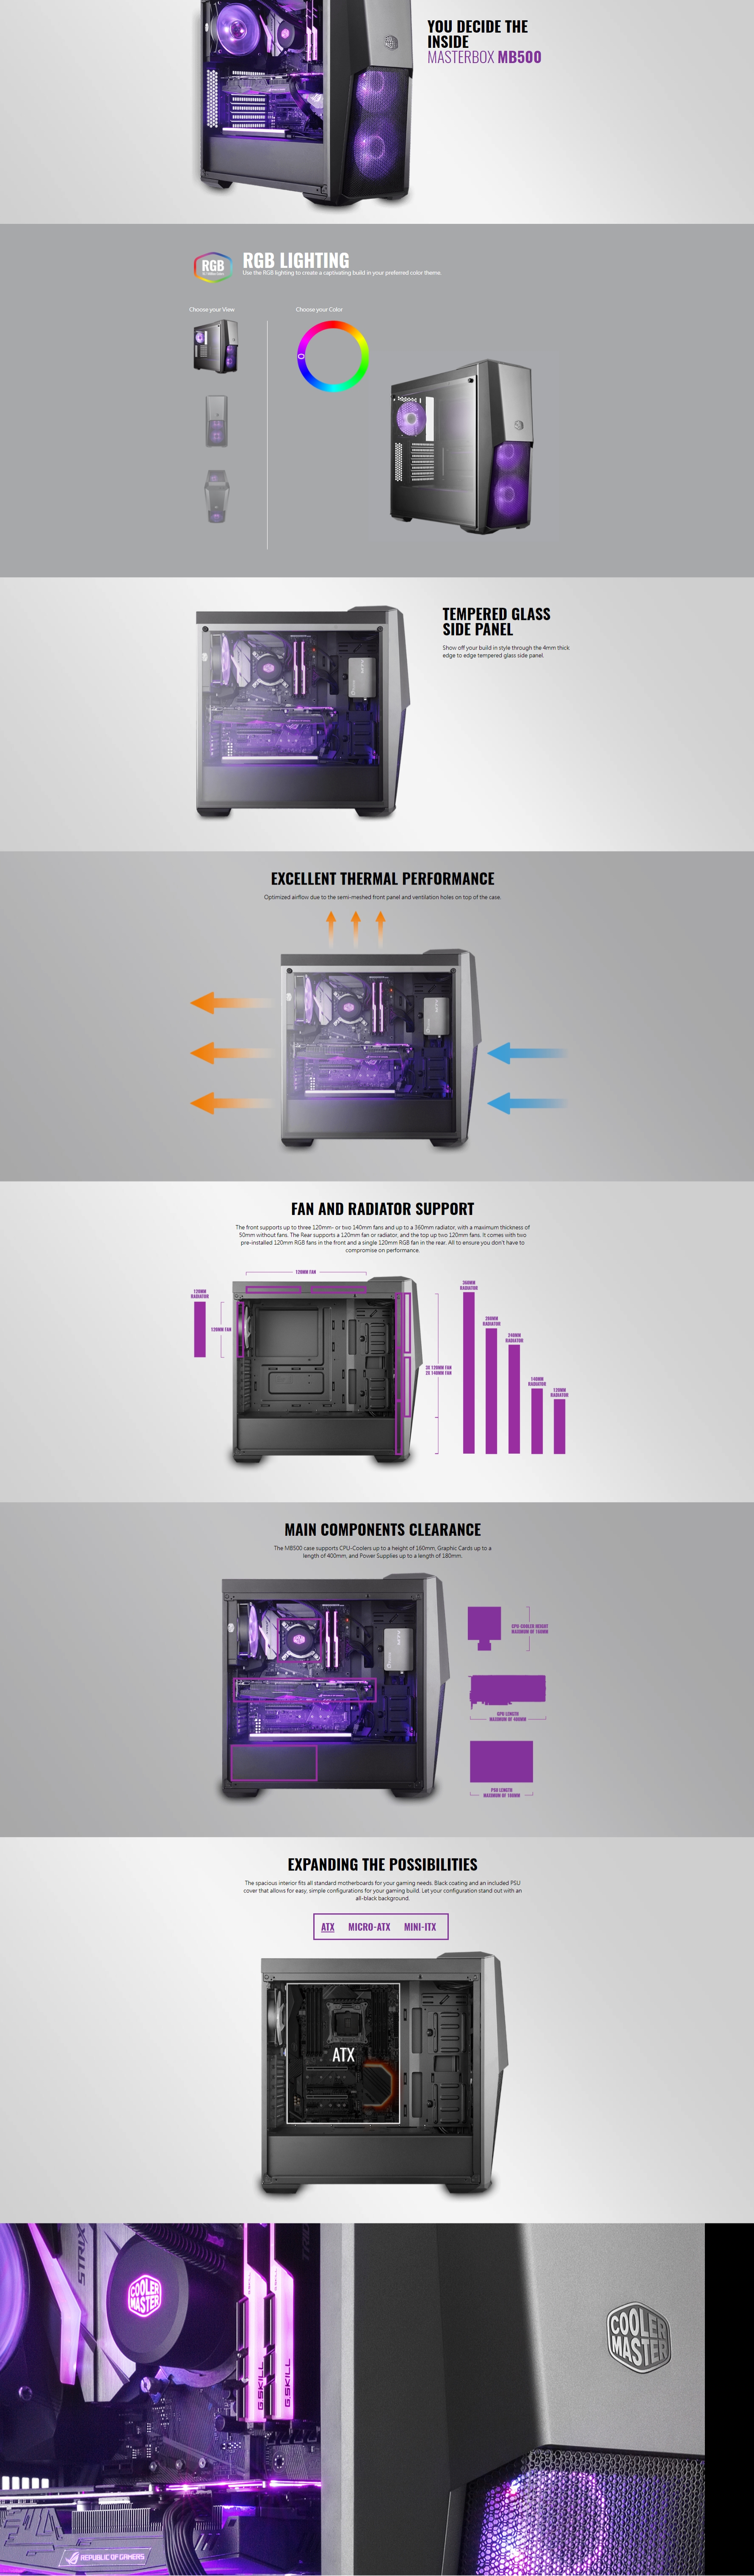 A large marketing image providing additional information about the product Cooler Master MasterBox MB500 RGB Mid Tower Case w/Side Panel Window - Additional alt info not provided